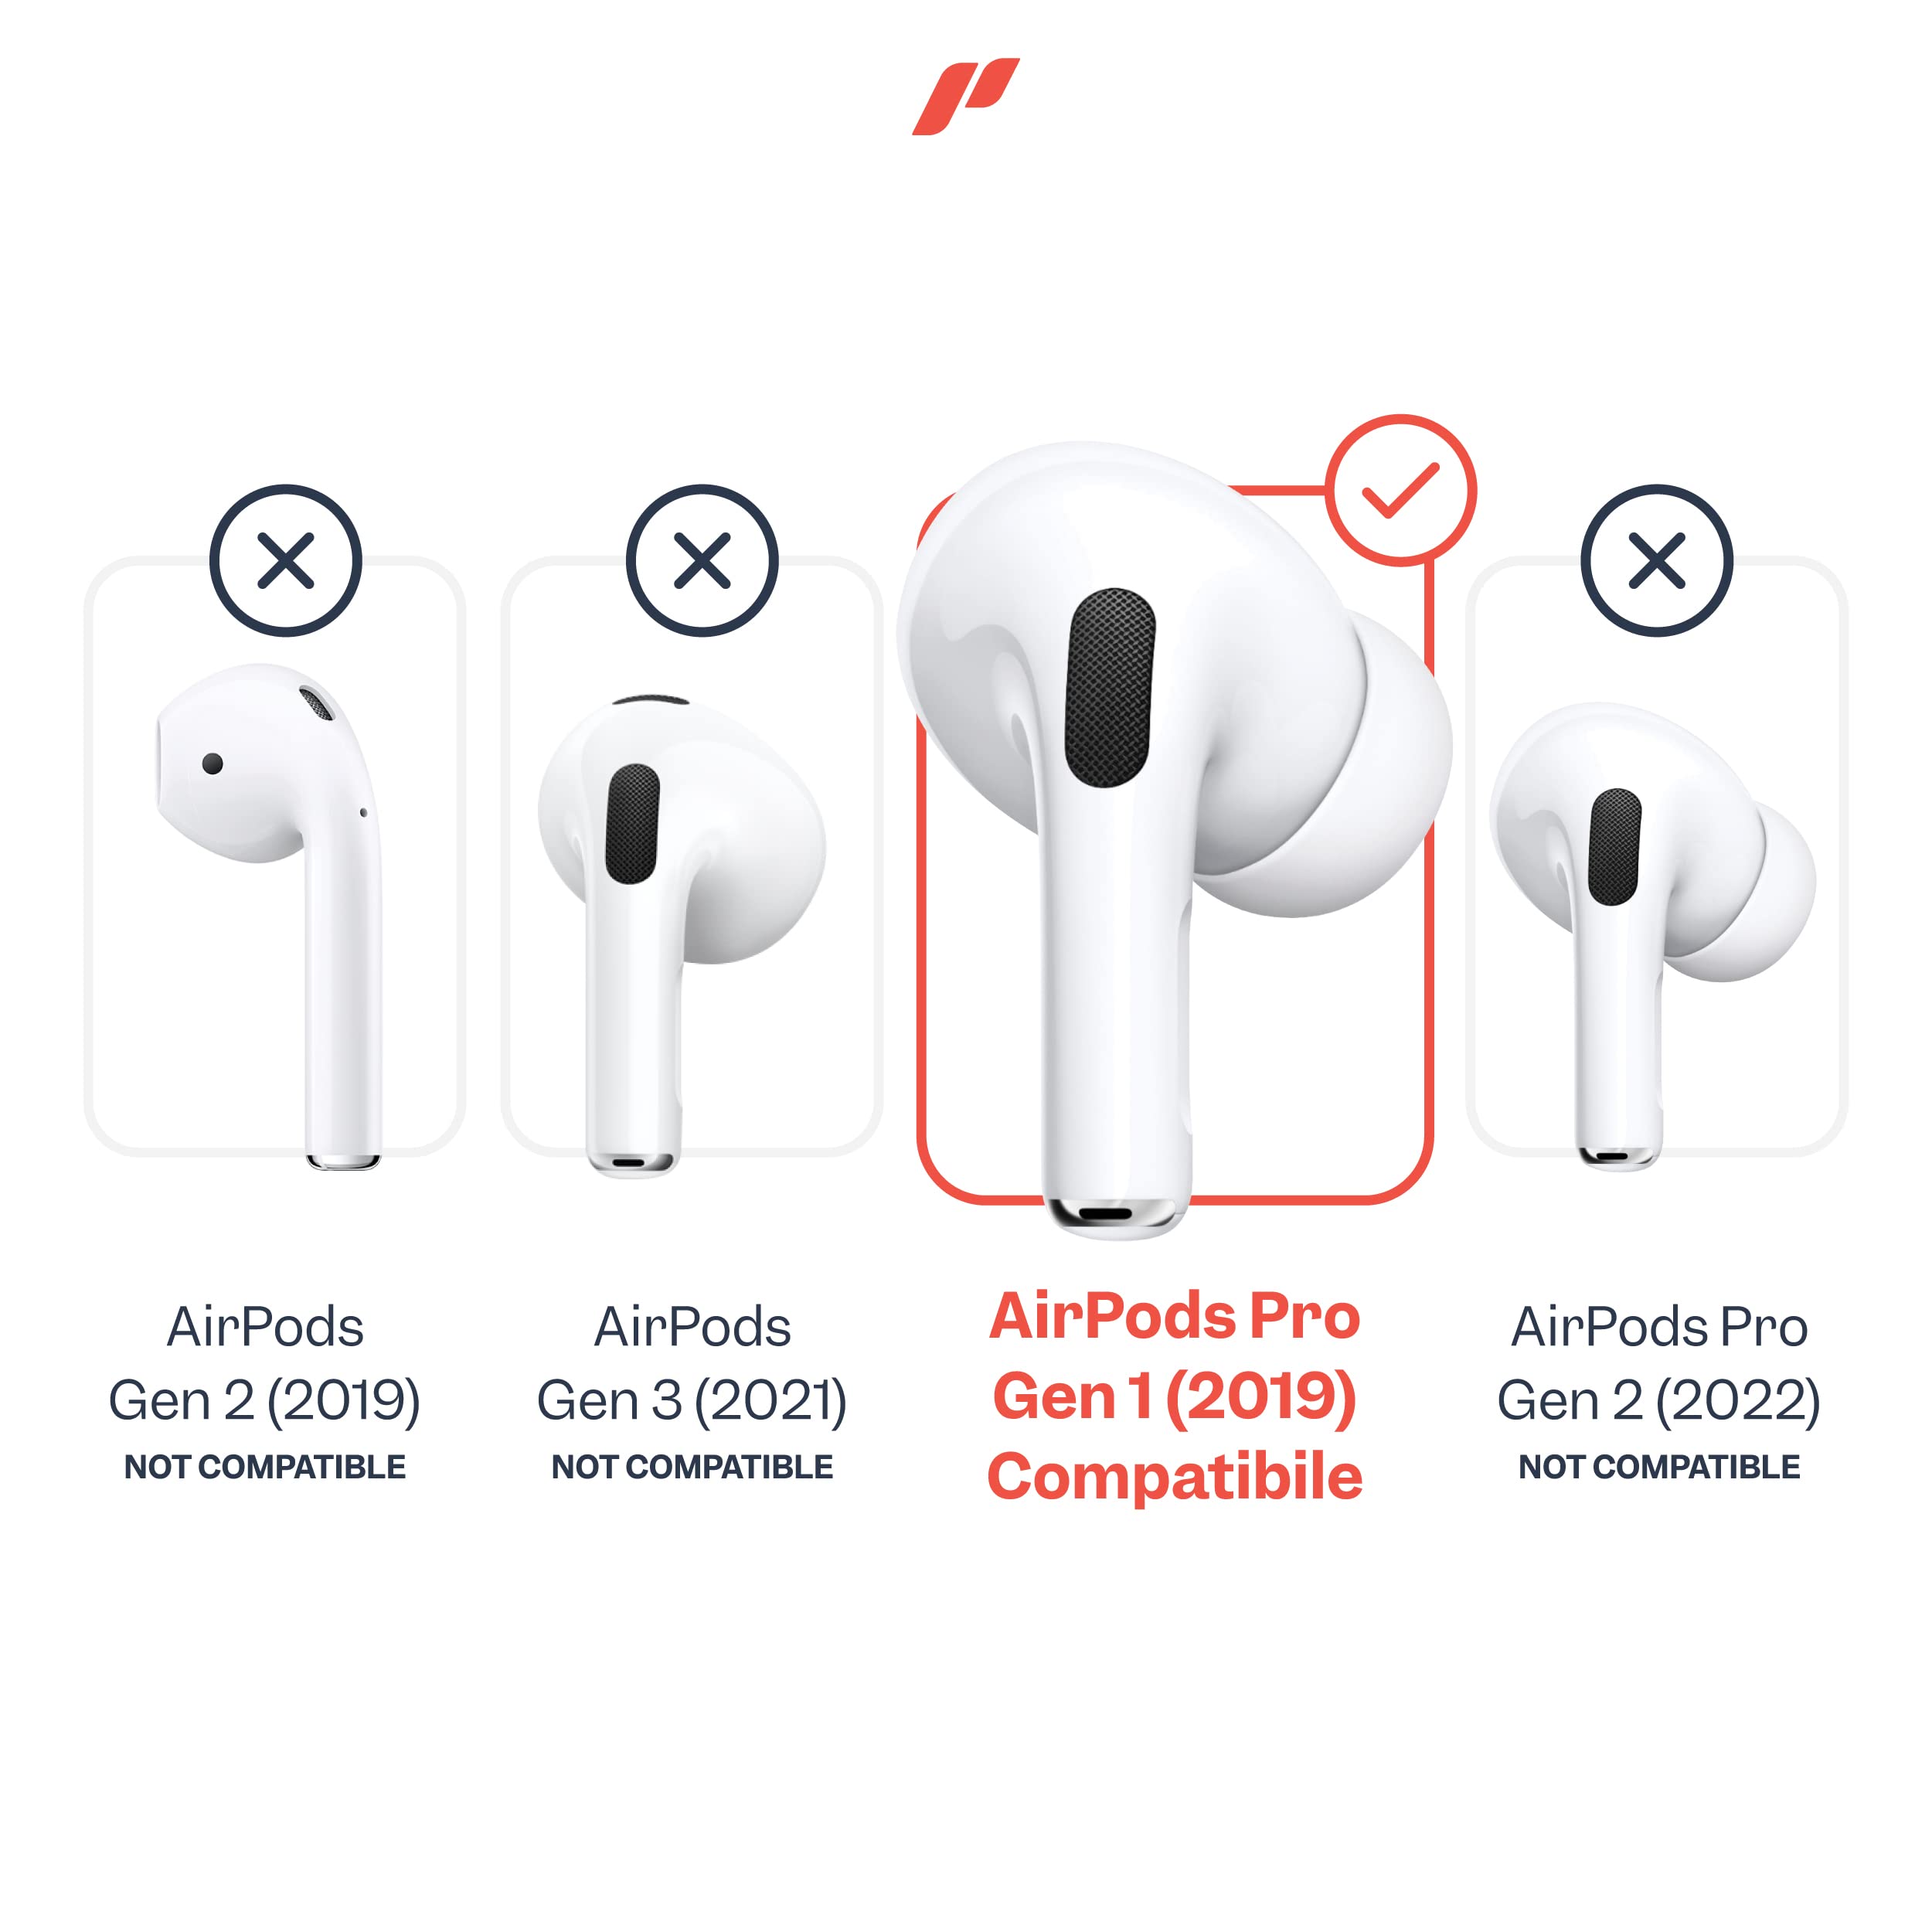 Proof Labs 3 Pairs for AirPods Pro Ear Hooks Covers [Added Storage Pouch] Accessories Compatible with Apple AirPods Pro Generation 1 (White)